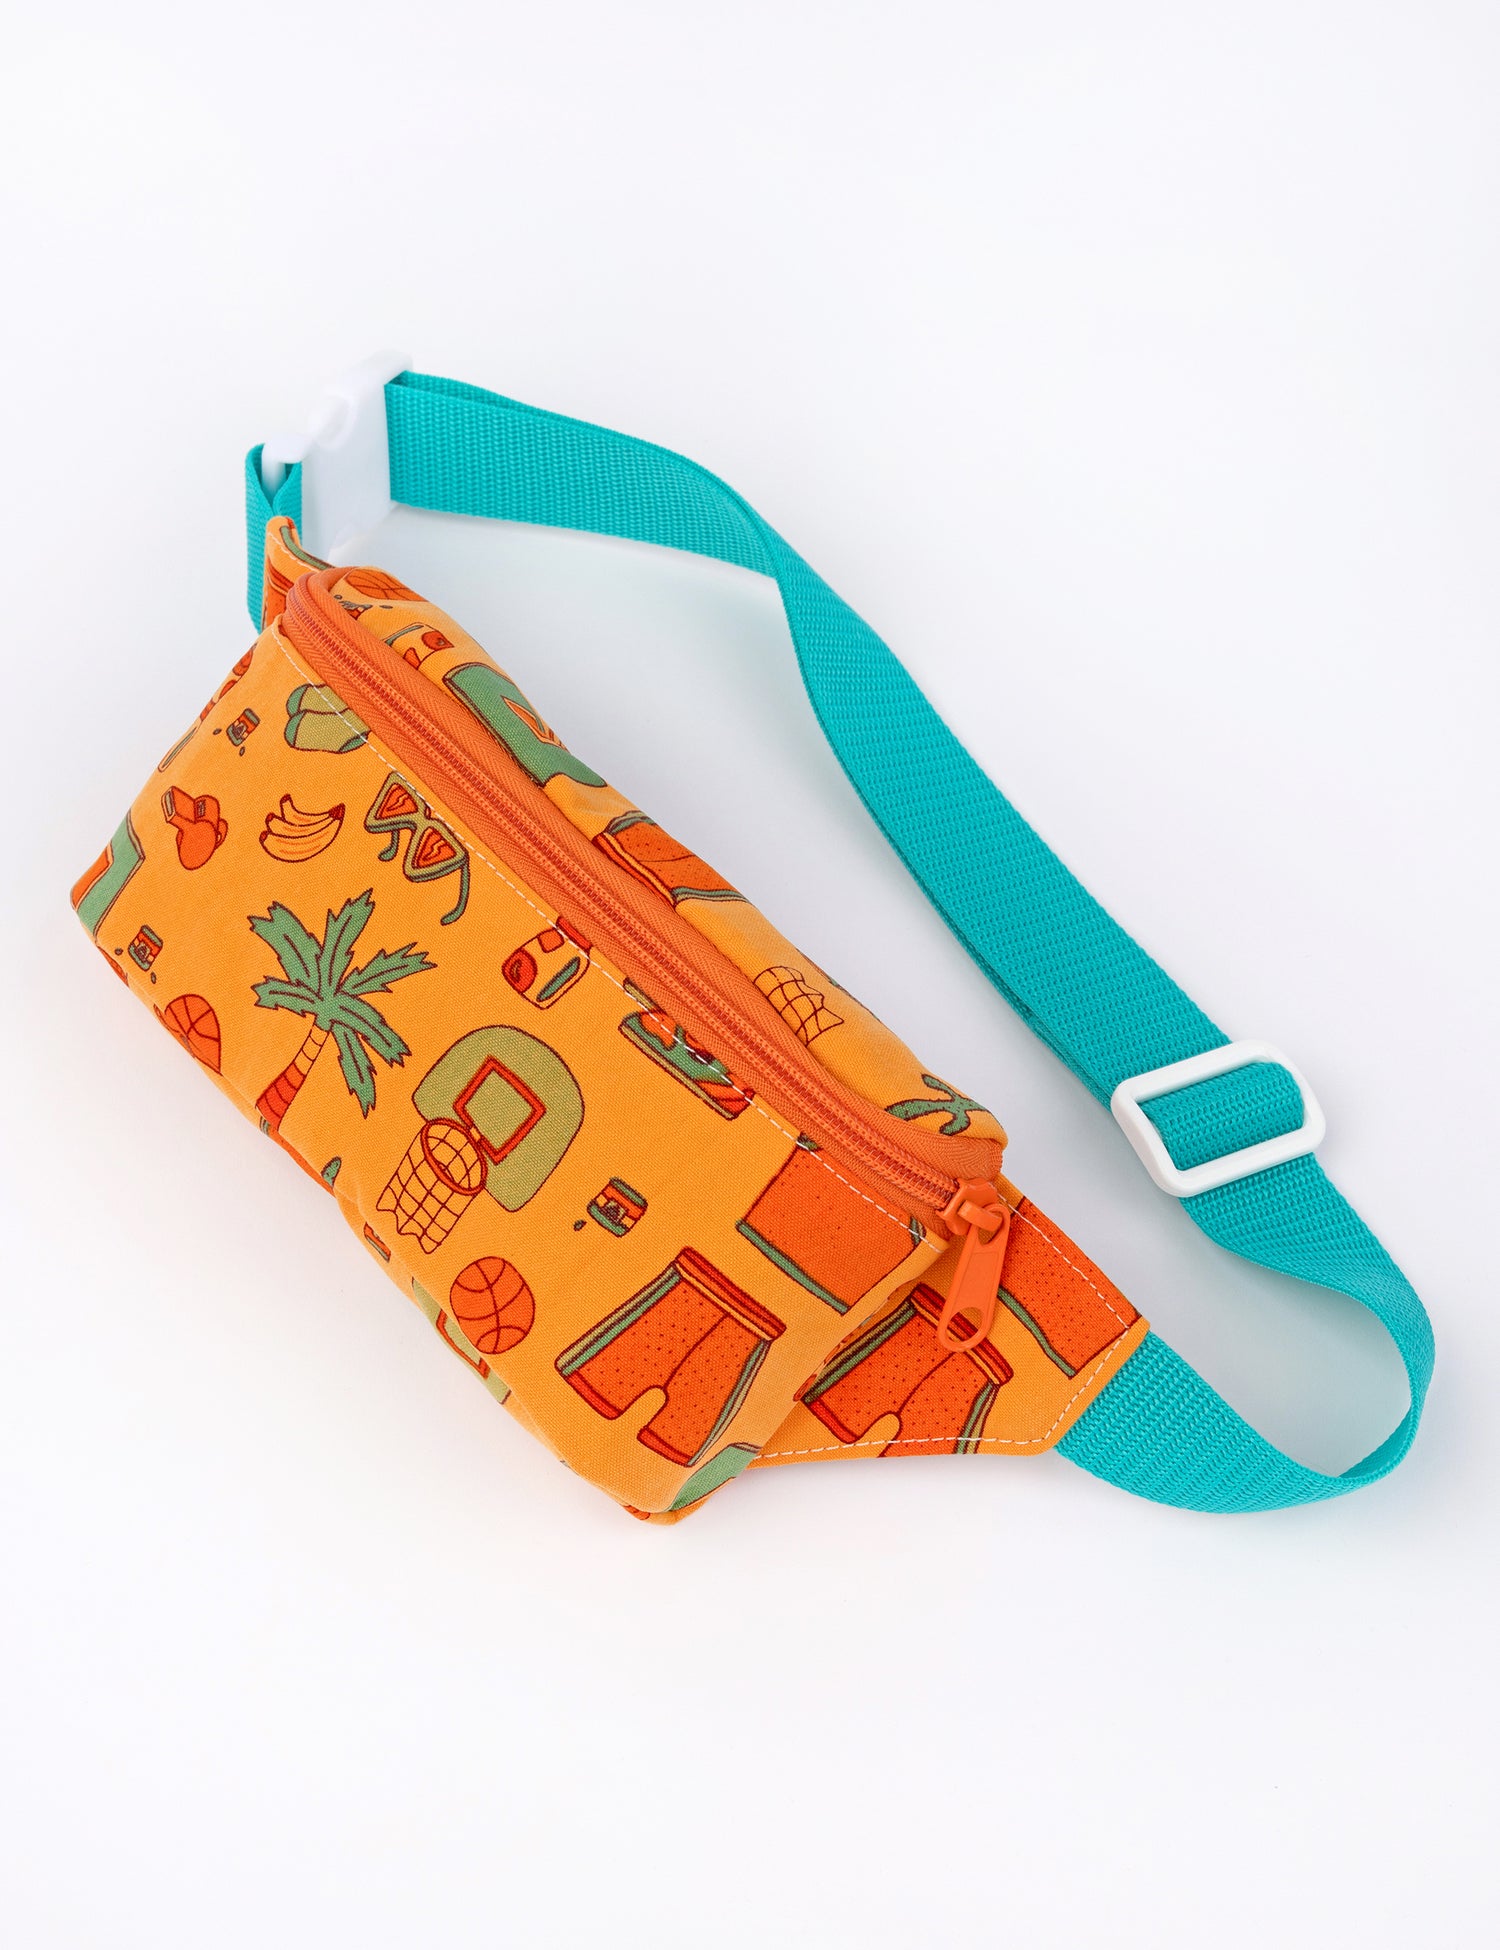 small orange fanny pack with basketball summer designs and blue strap